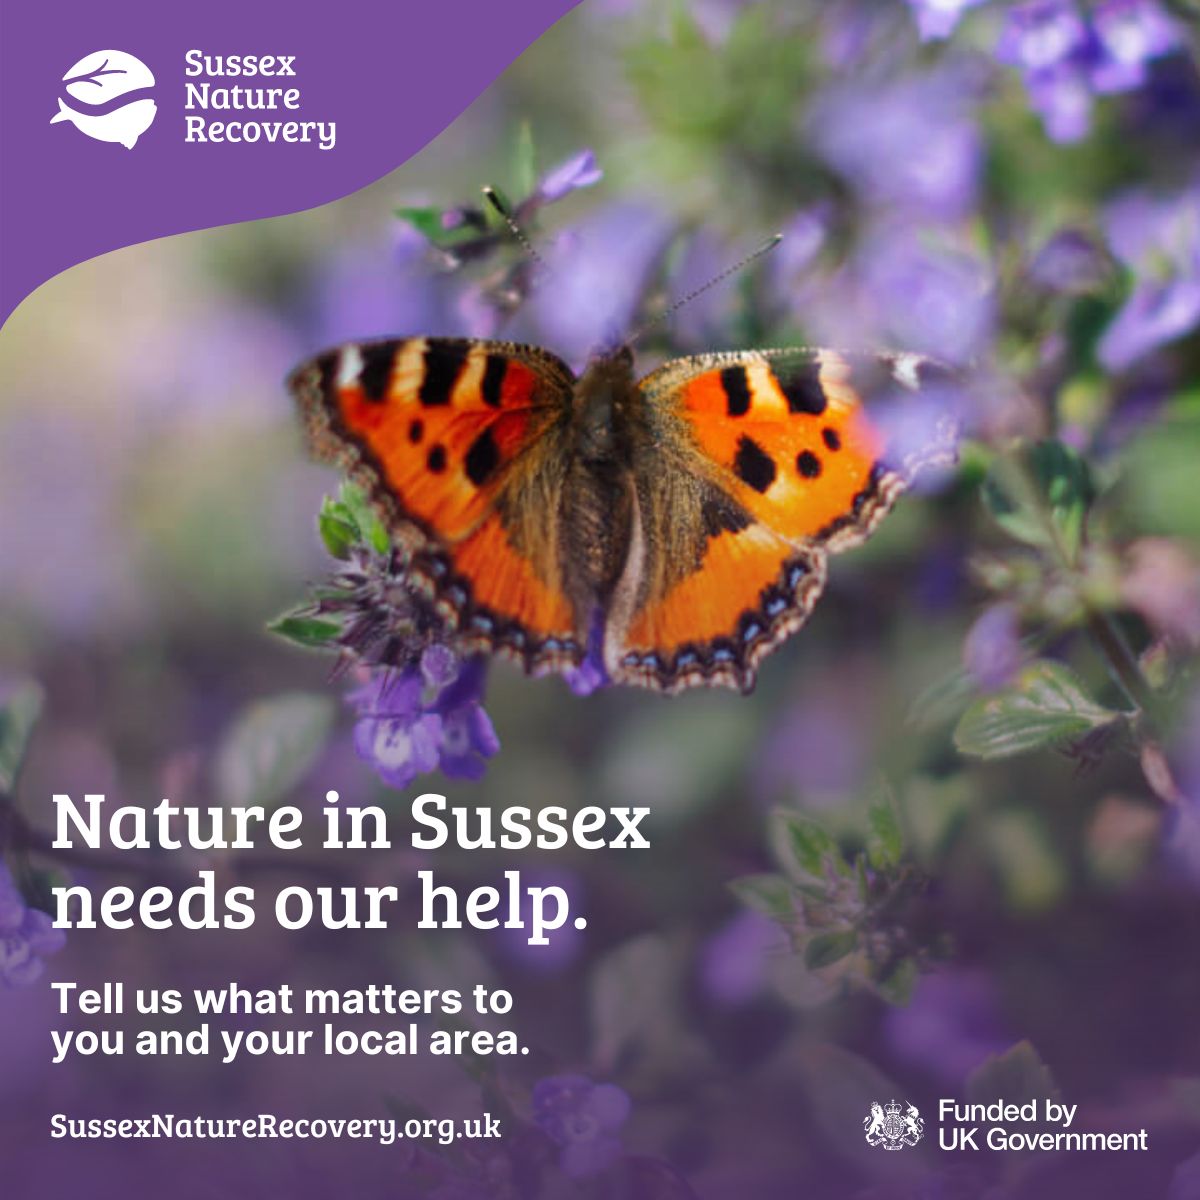 Are you part of a community group or organisation that’s already helping nature in Sussex? Take our detailed survey to tell us your priorities and projects, and help shape your Local Nature Recovery Strategy: surveymonkey.com/r/LHXHQ2K #SussexNatureRecovery #HelpSussexNature